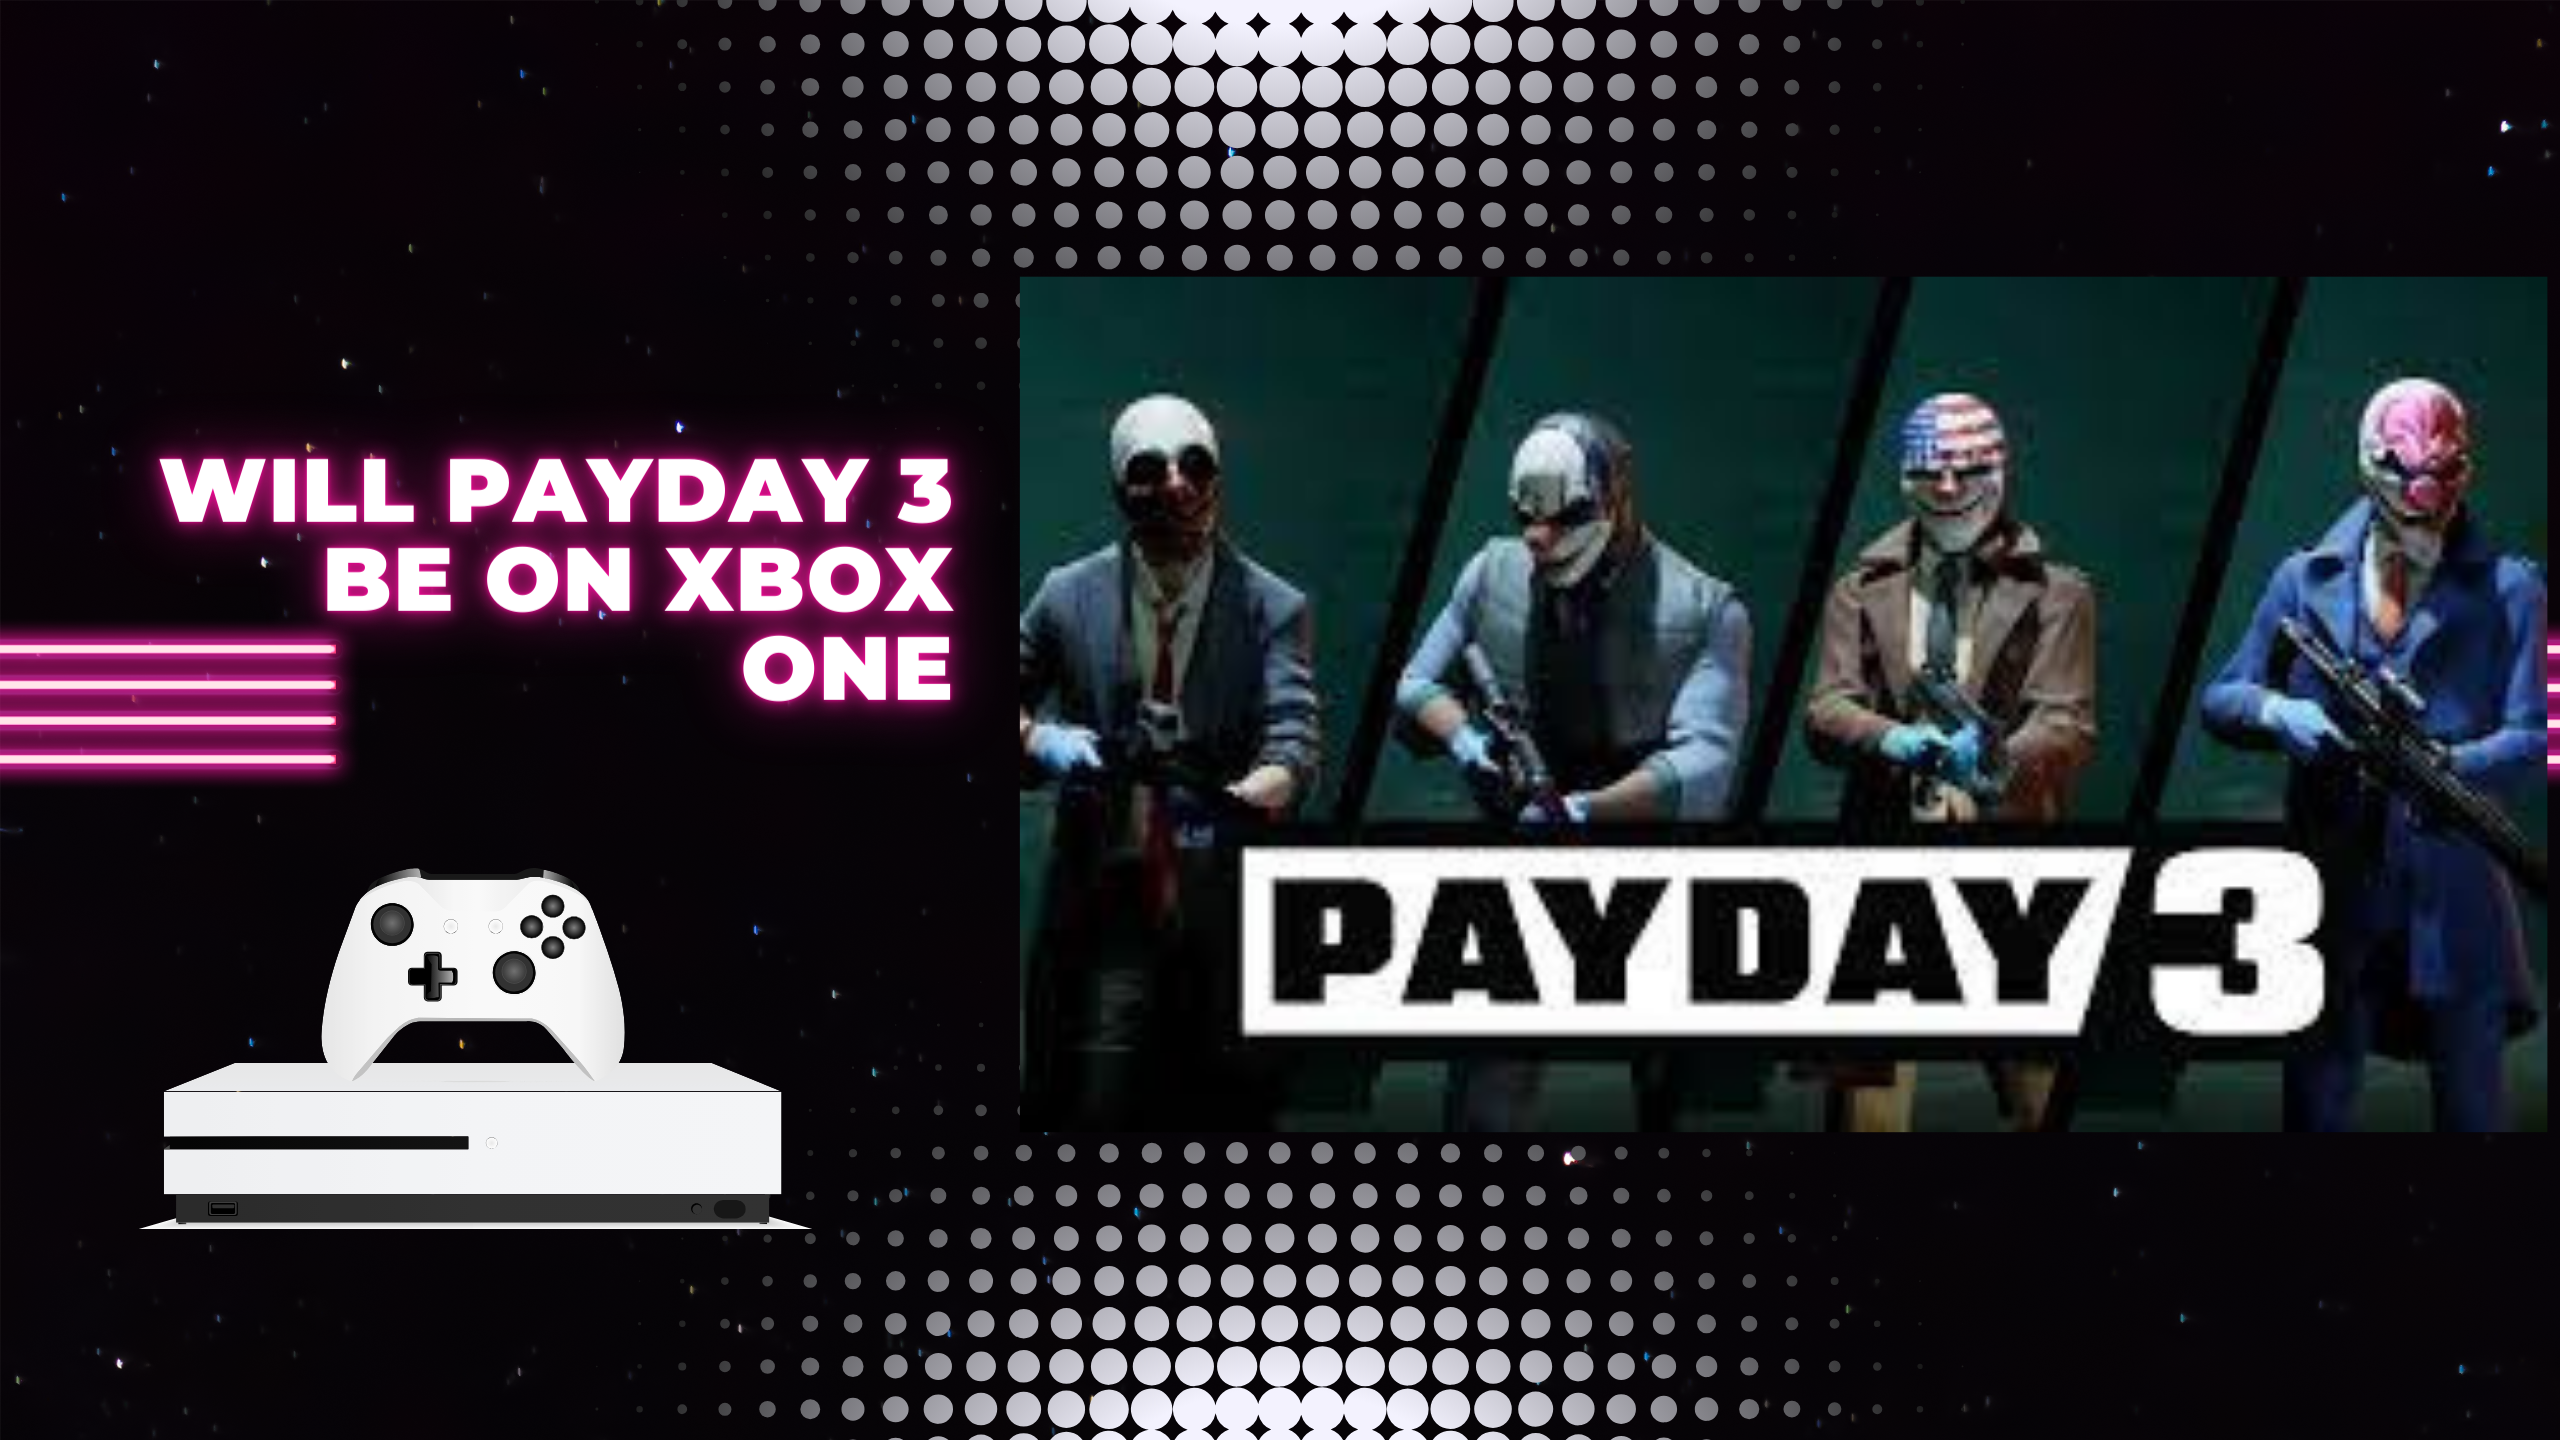 Will Payday 3 be on Xbox One